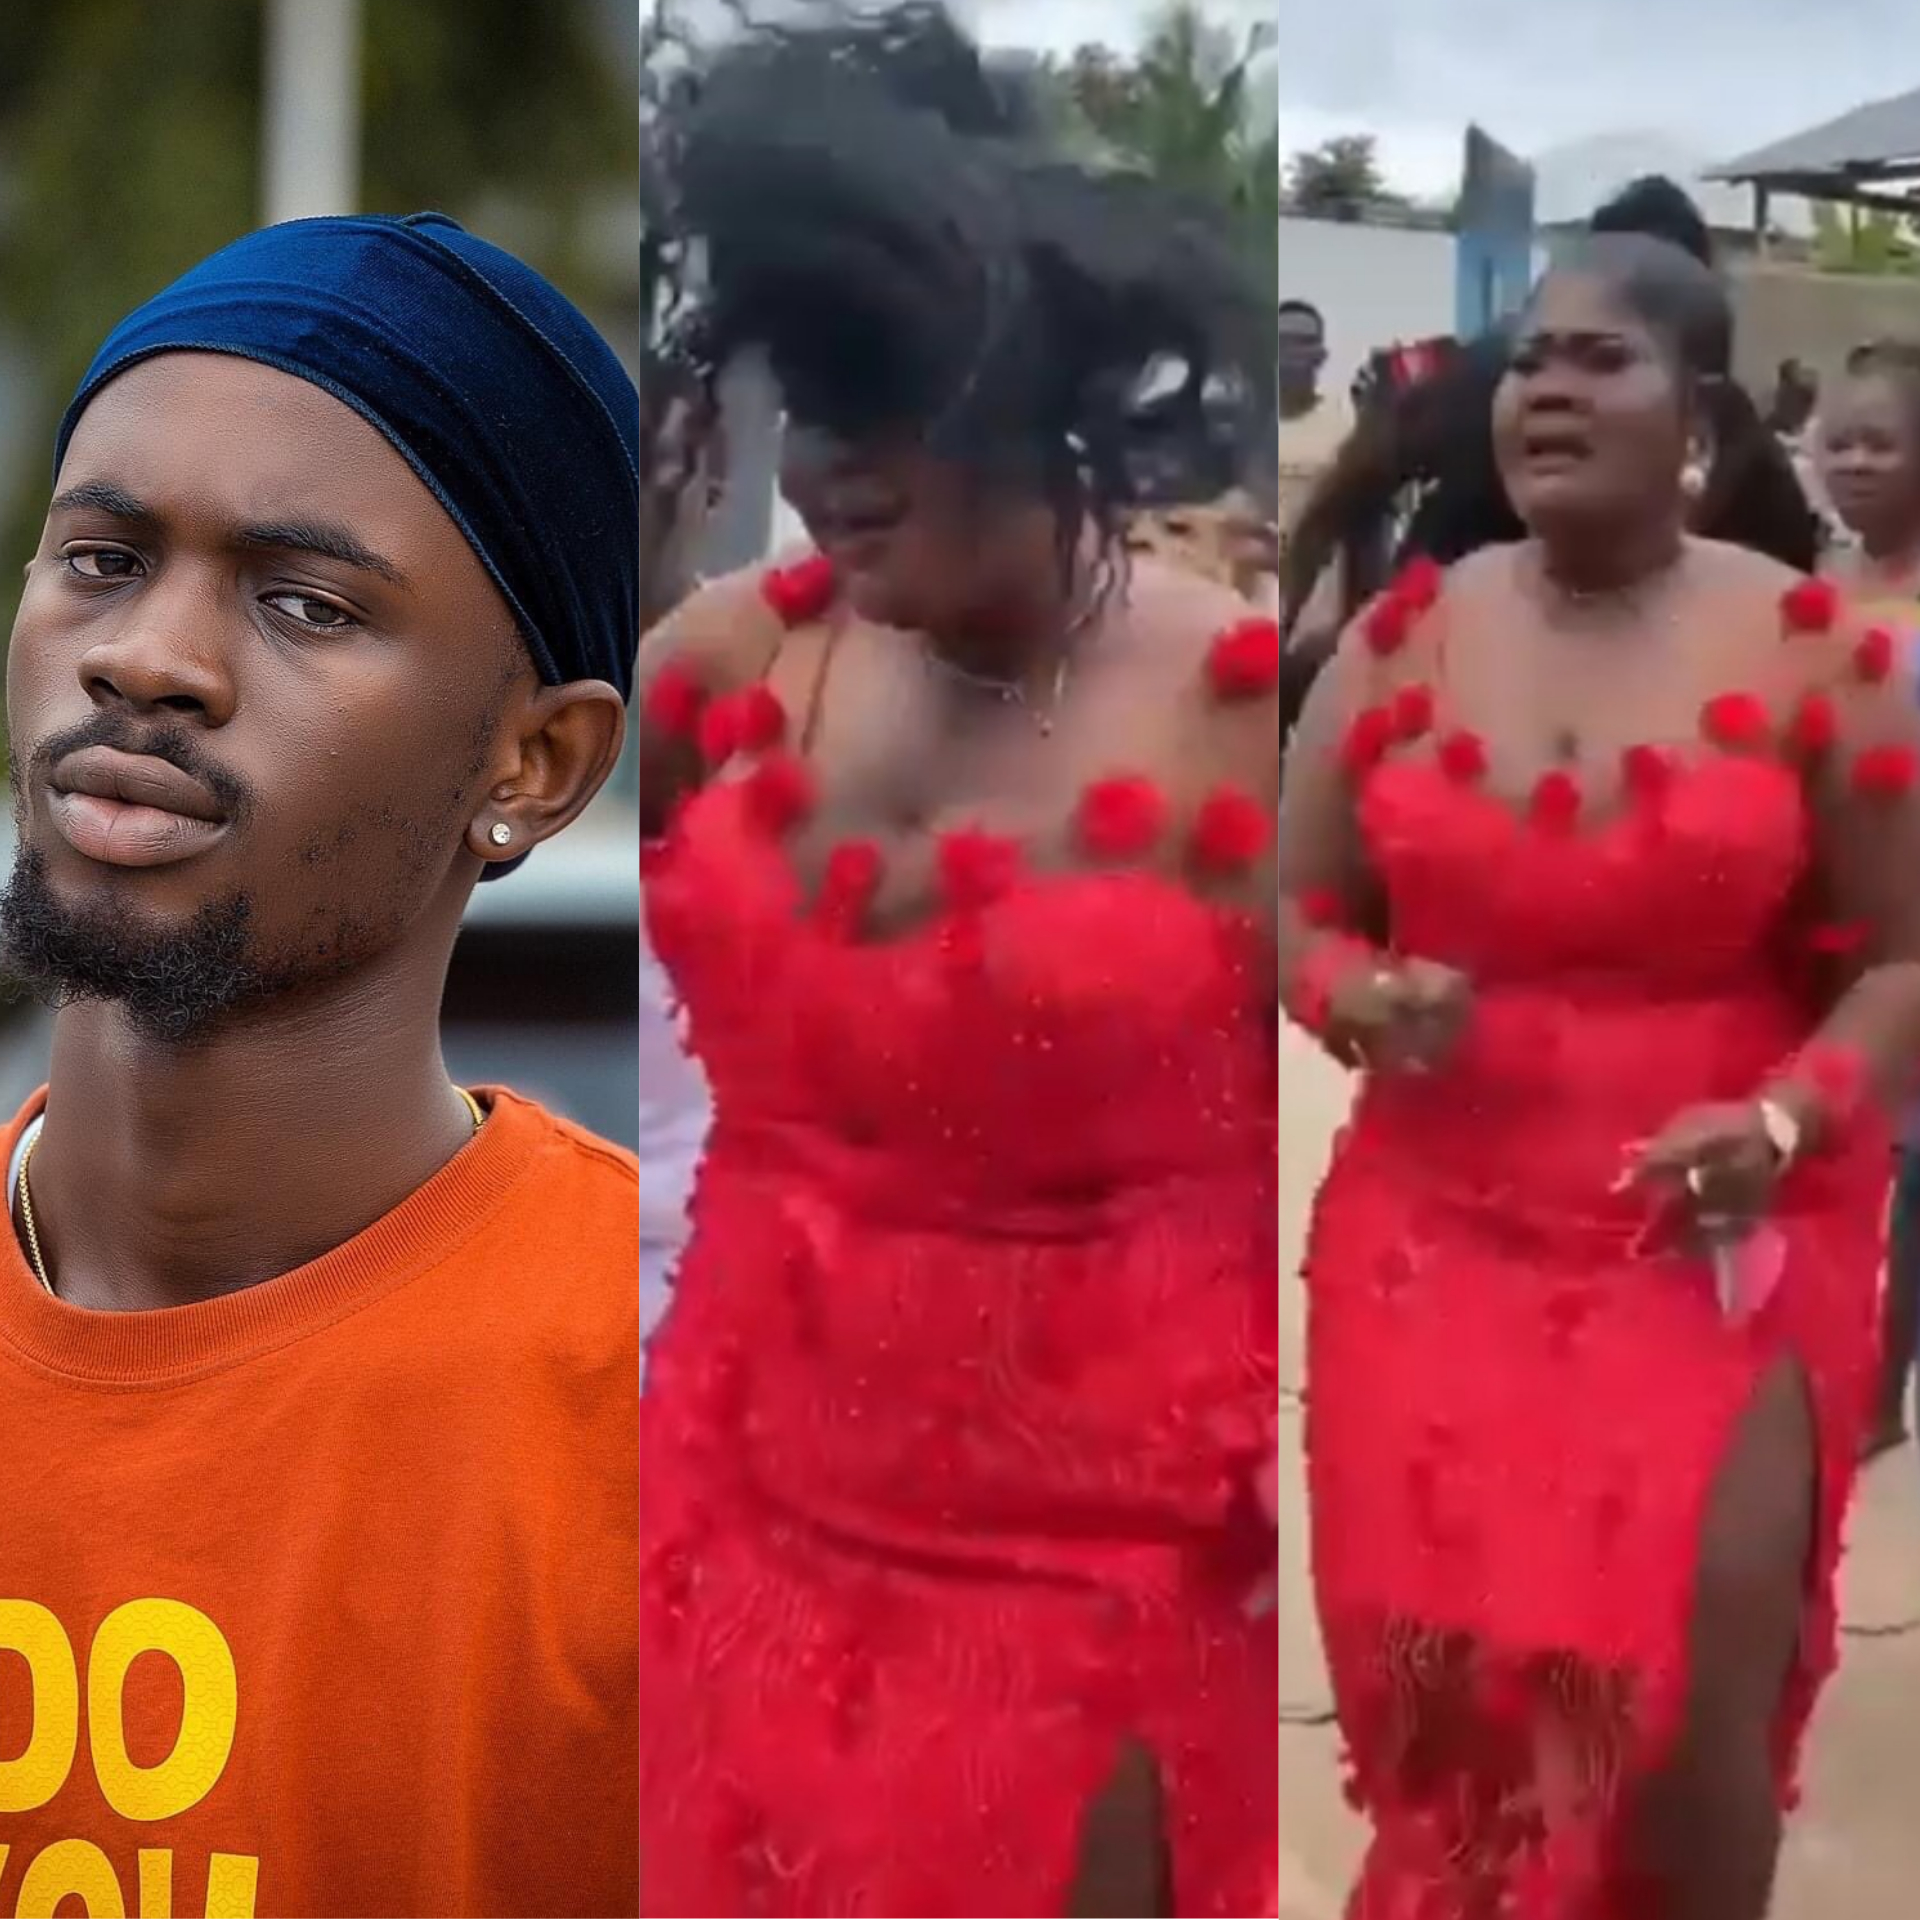 Lady madly sings Black Sherif's Second Sermon song at a wedding ceremony